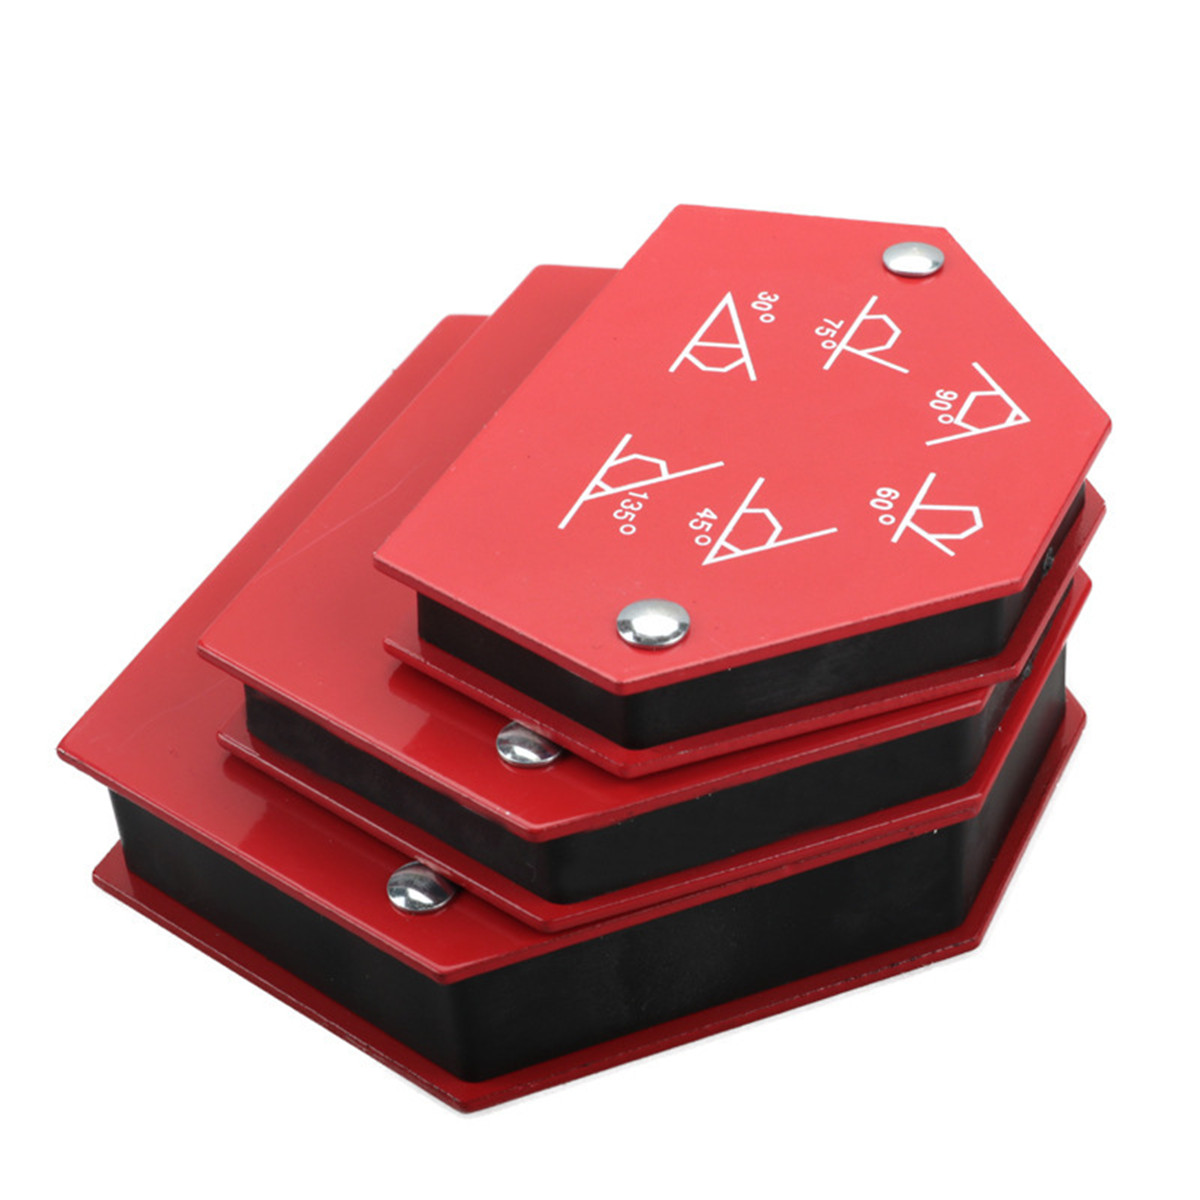 6Pcs-Triangle-Welding-Positioner-Magnetic-Fixed-Angle-Soldering-Locator-Tools-Without-Switch-Welding-1757937-7